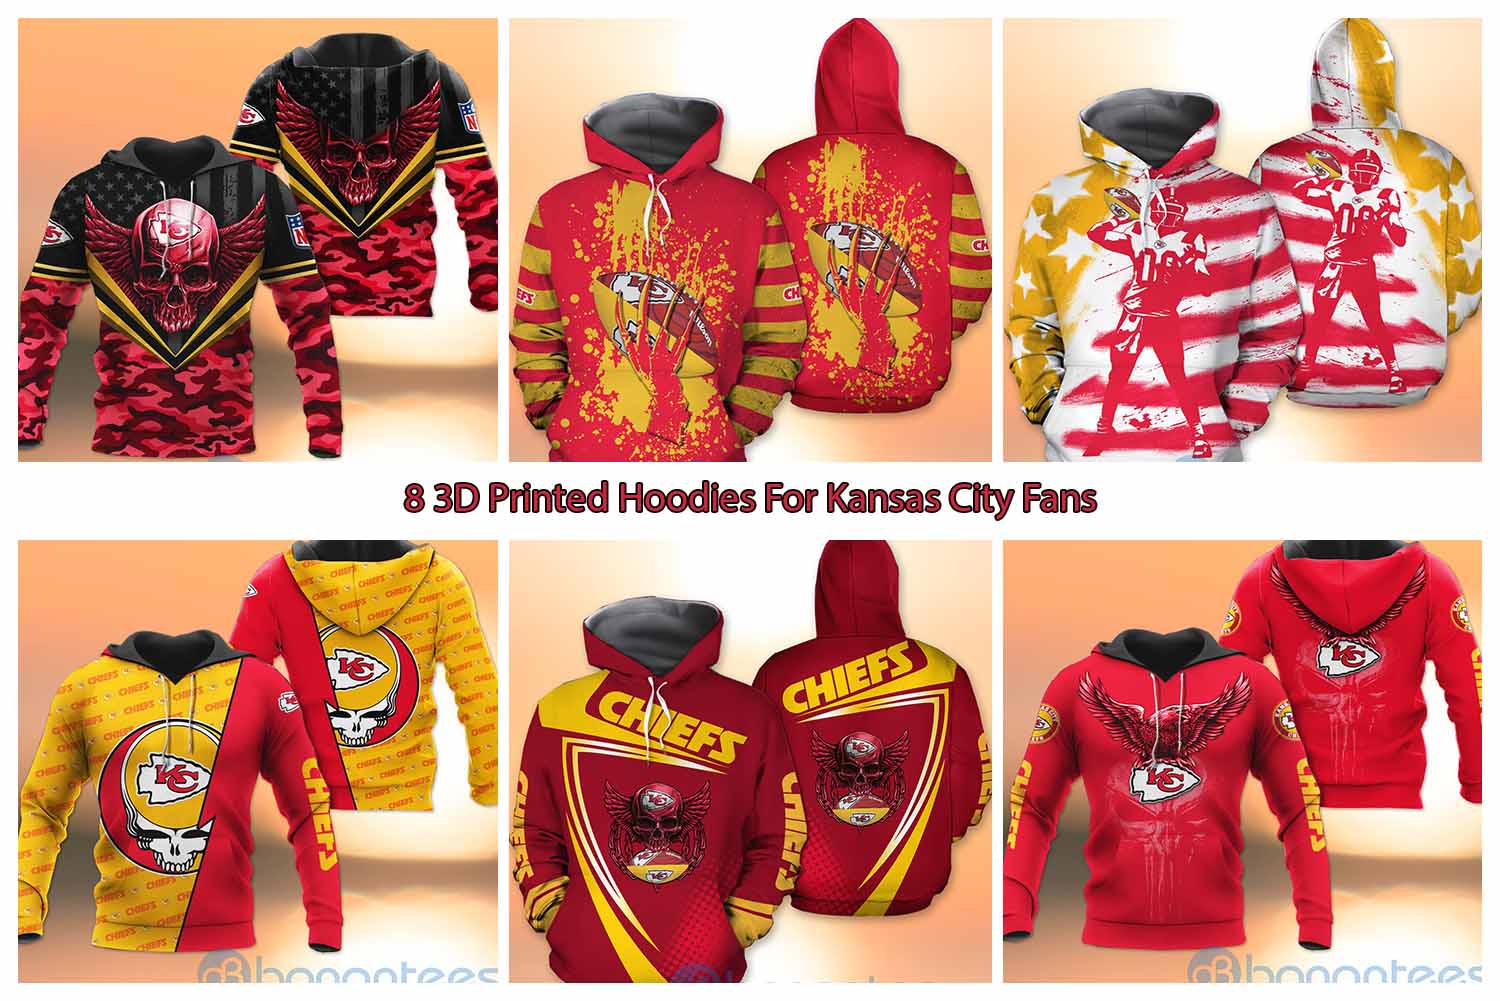 8 3D Printed Hoodies For Kansas City Fans